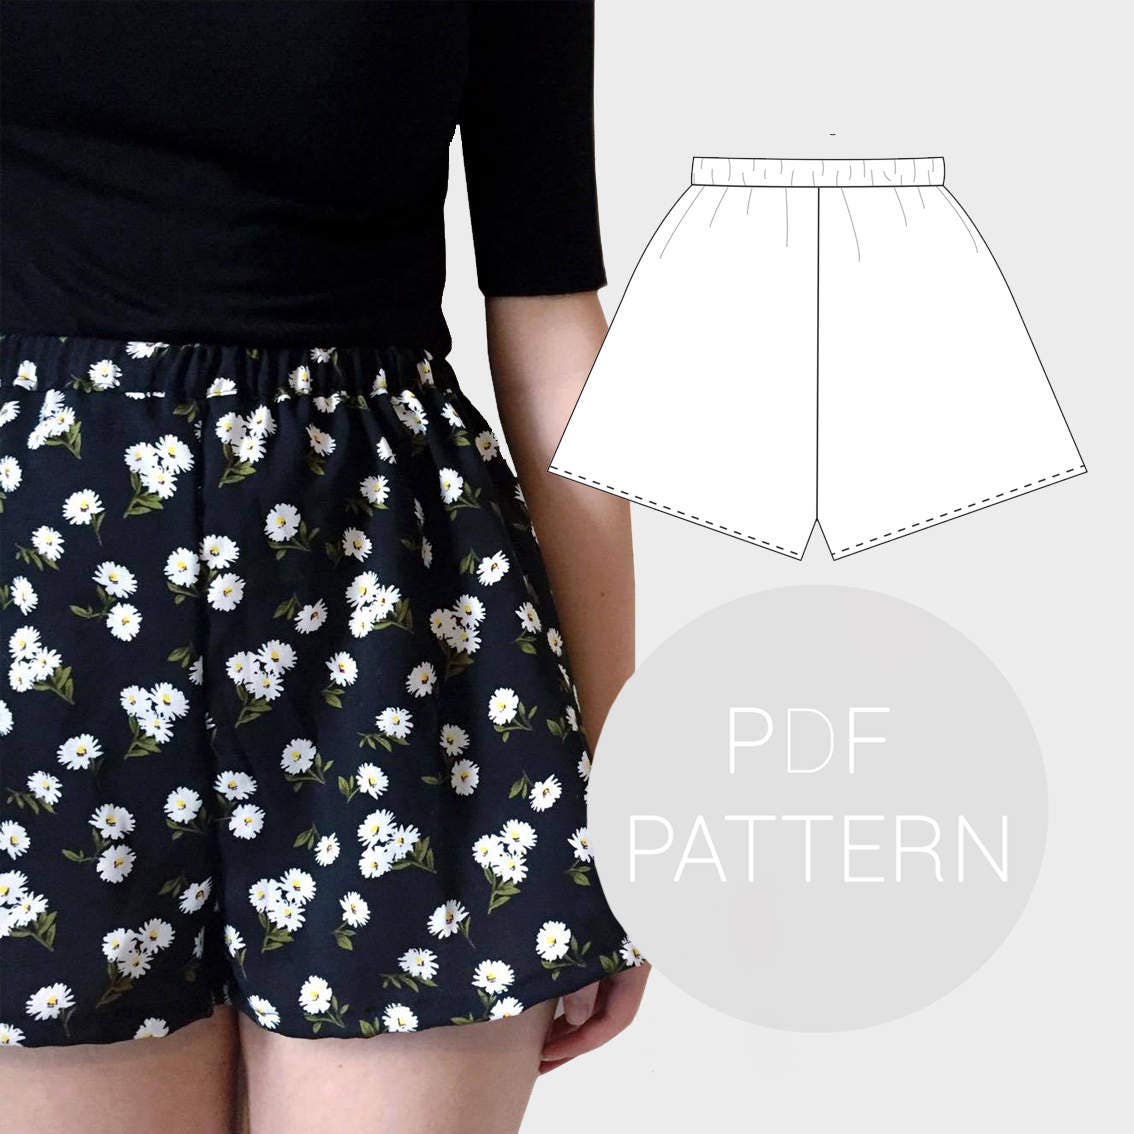 Womens high waisted shorts PDF printable sewing pattern. | Etsy